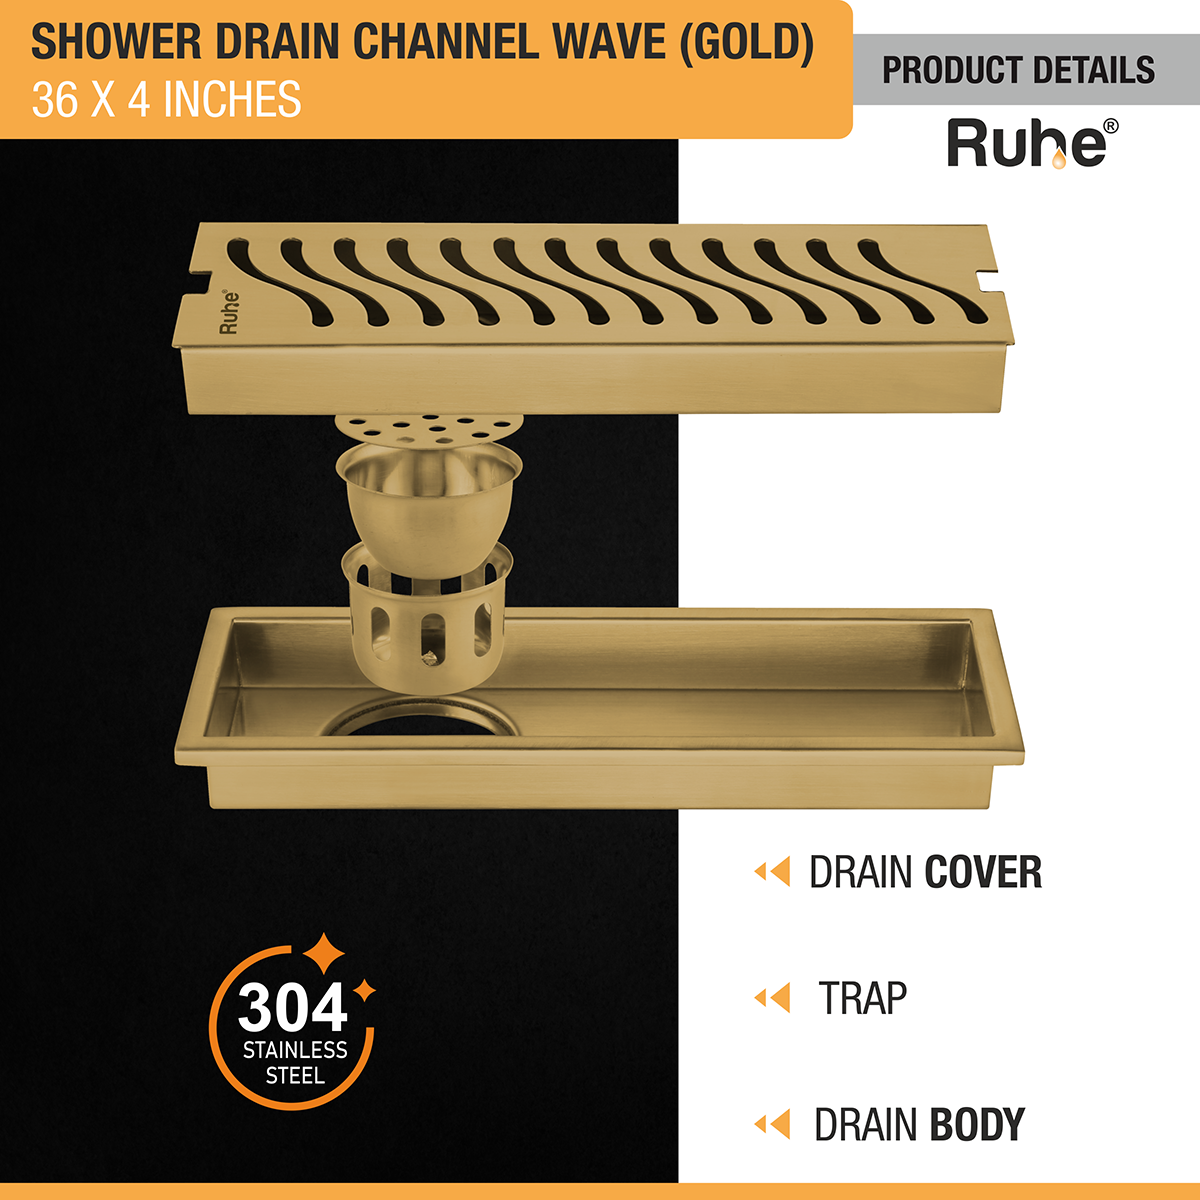 Wave Shower Drain Channel (36 x 4 Inches) YELLOW GOLD product details